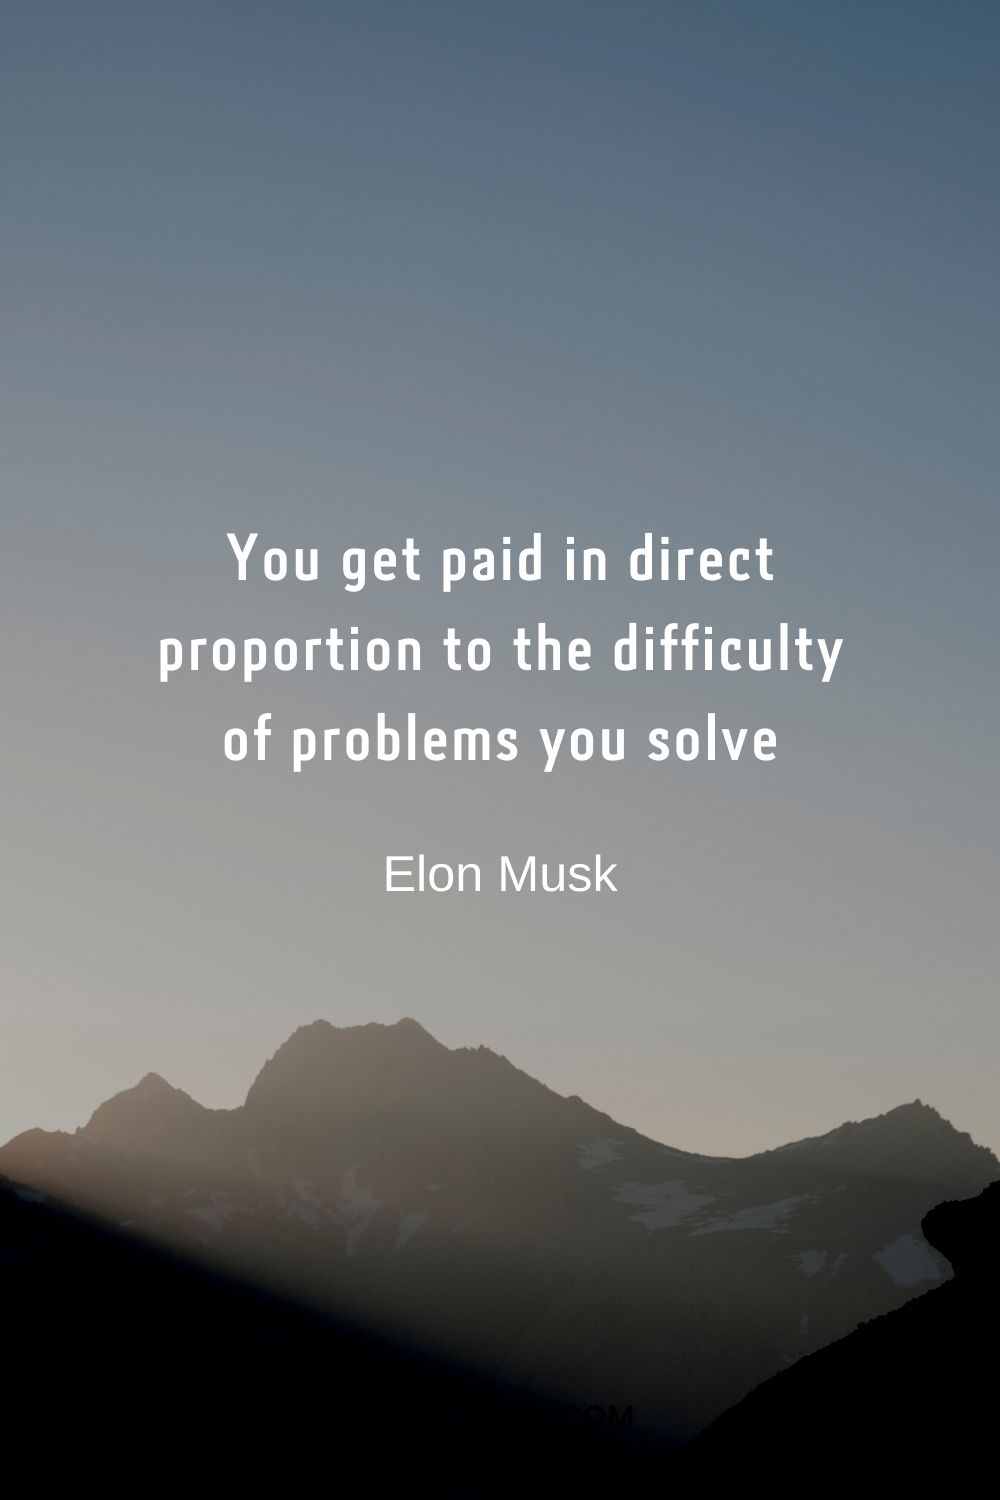 You get paid in direct proportion to the difficulty of problems you solve